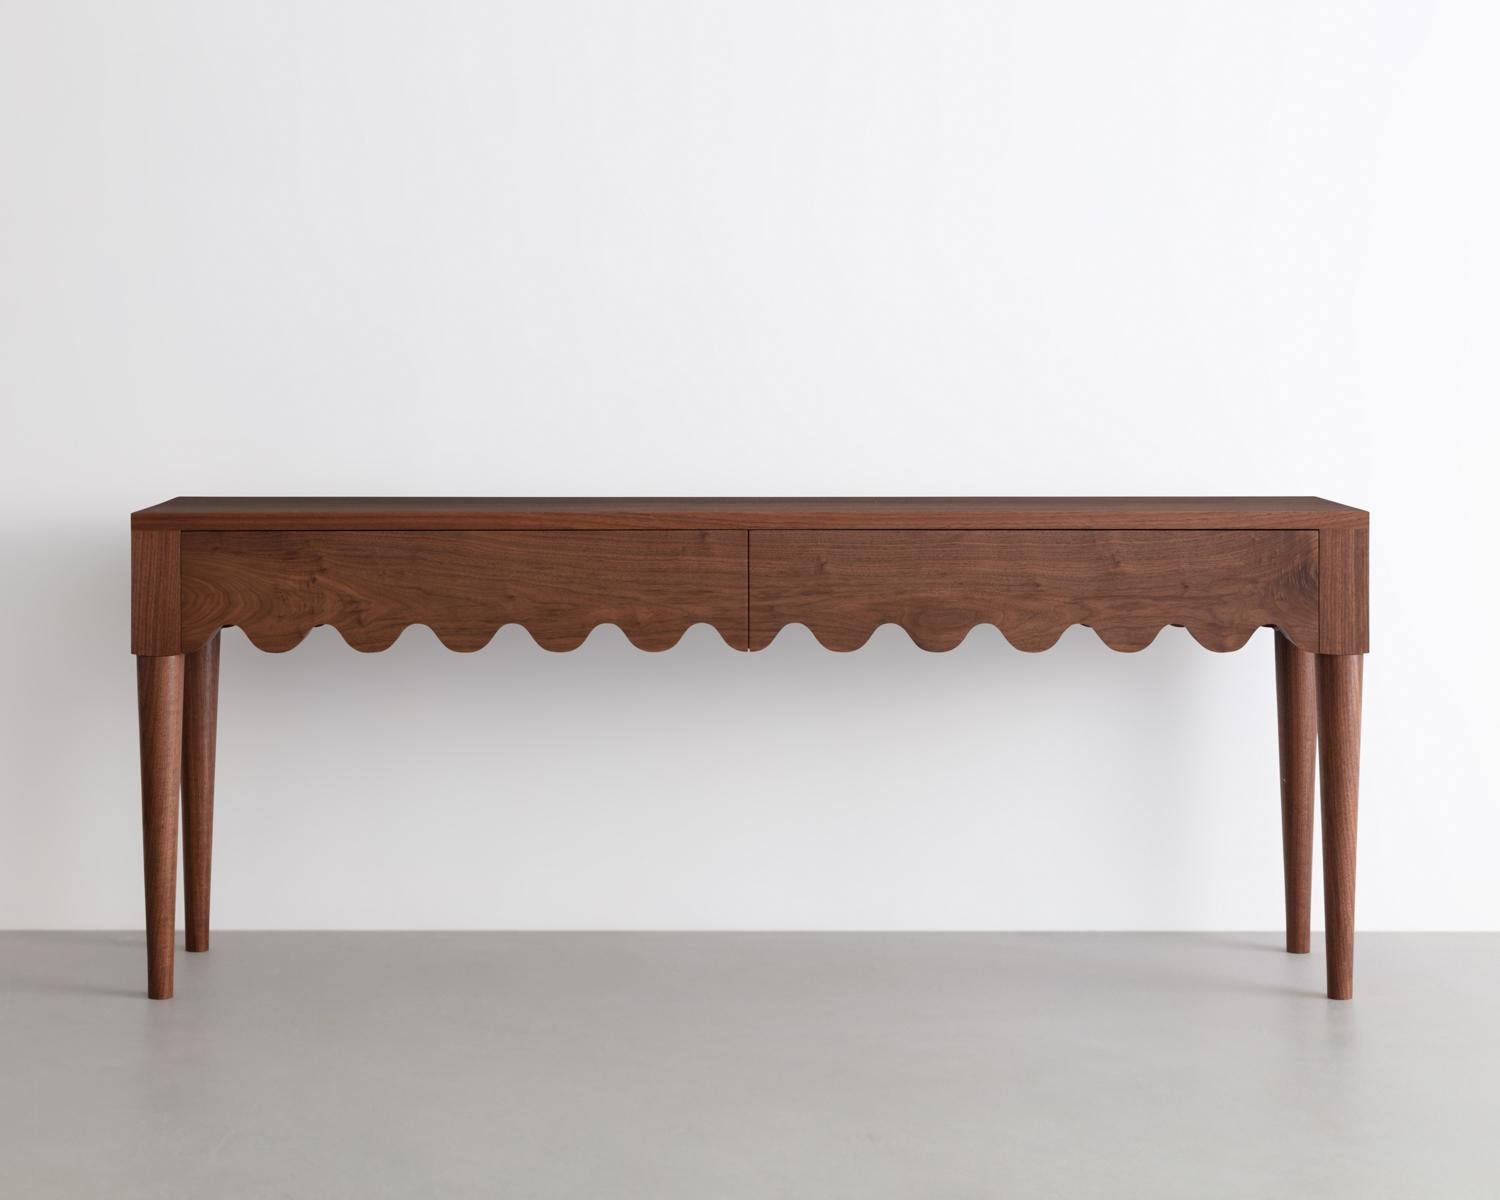 Designed and built in the studio this entryway table features a playful detail that continues along its double drawer faces and seamlessly wraps around its form. Hand turned solid Walnut legs complete its form.

Made from solid Walnut -inspired by